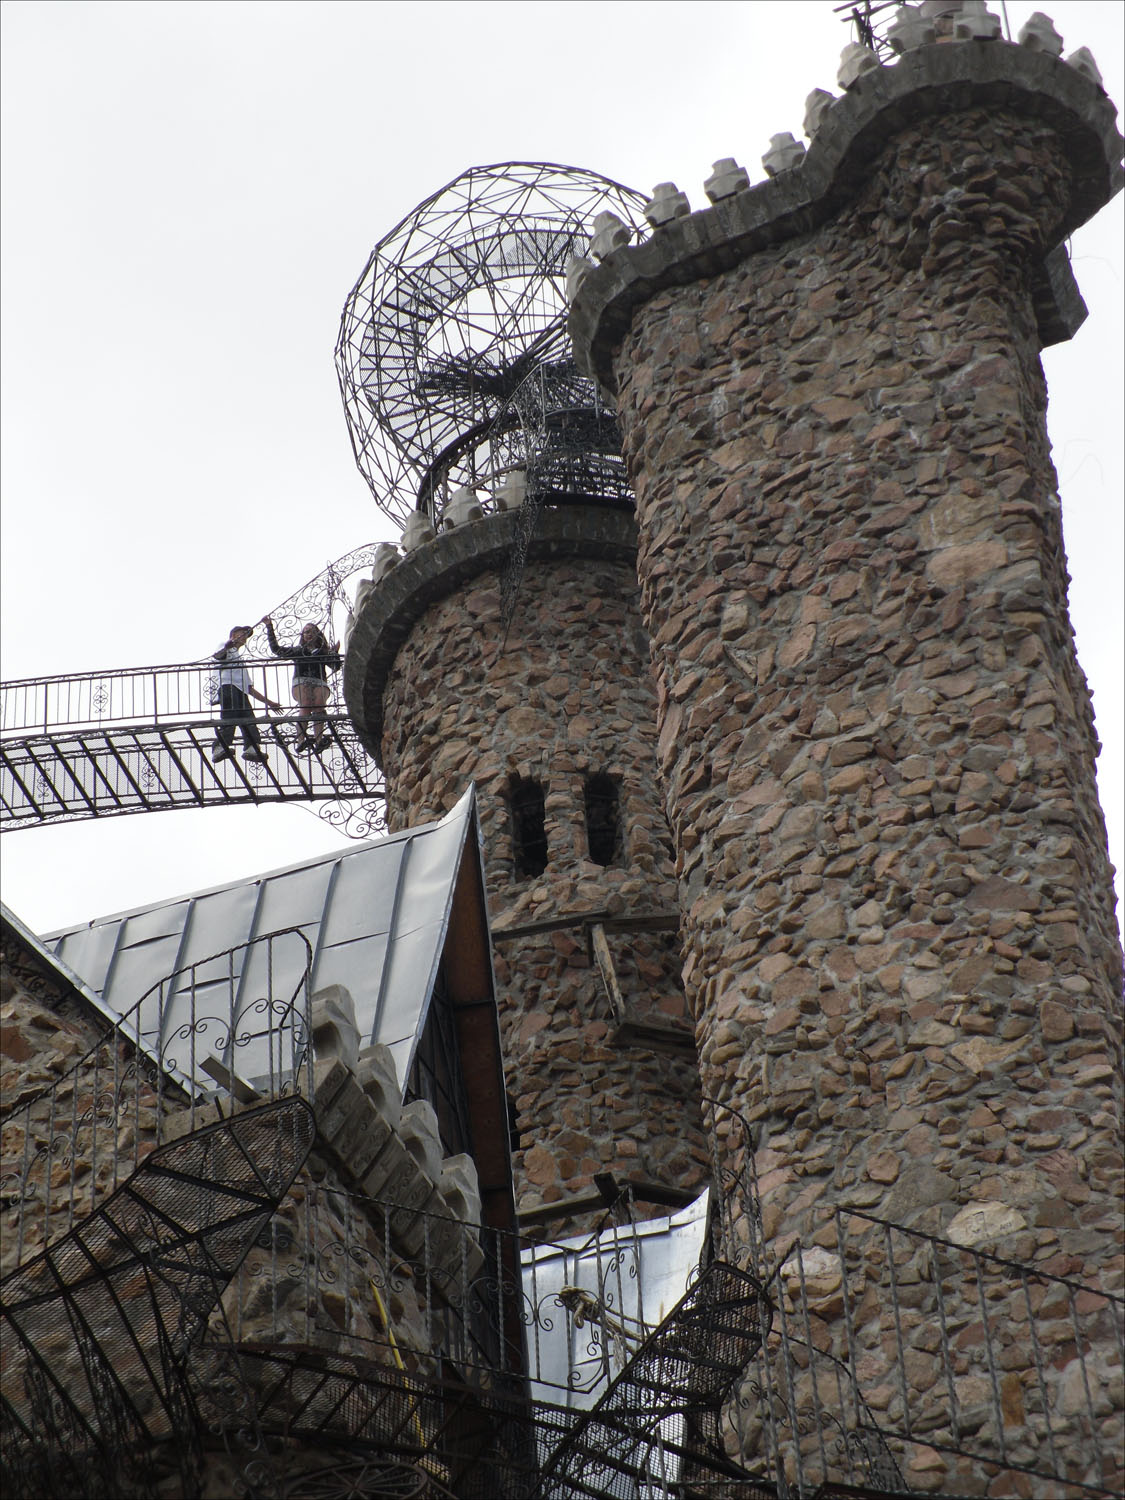 Bishop's Castle in Colorado-more turrets and walkways